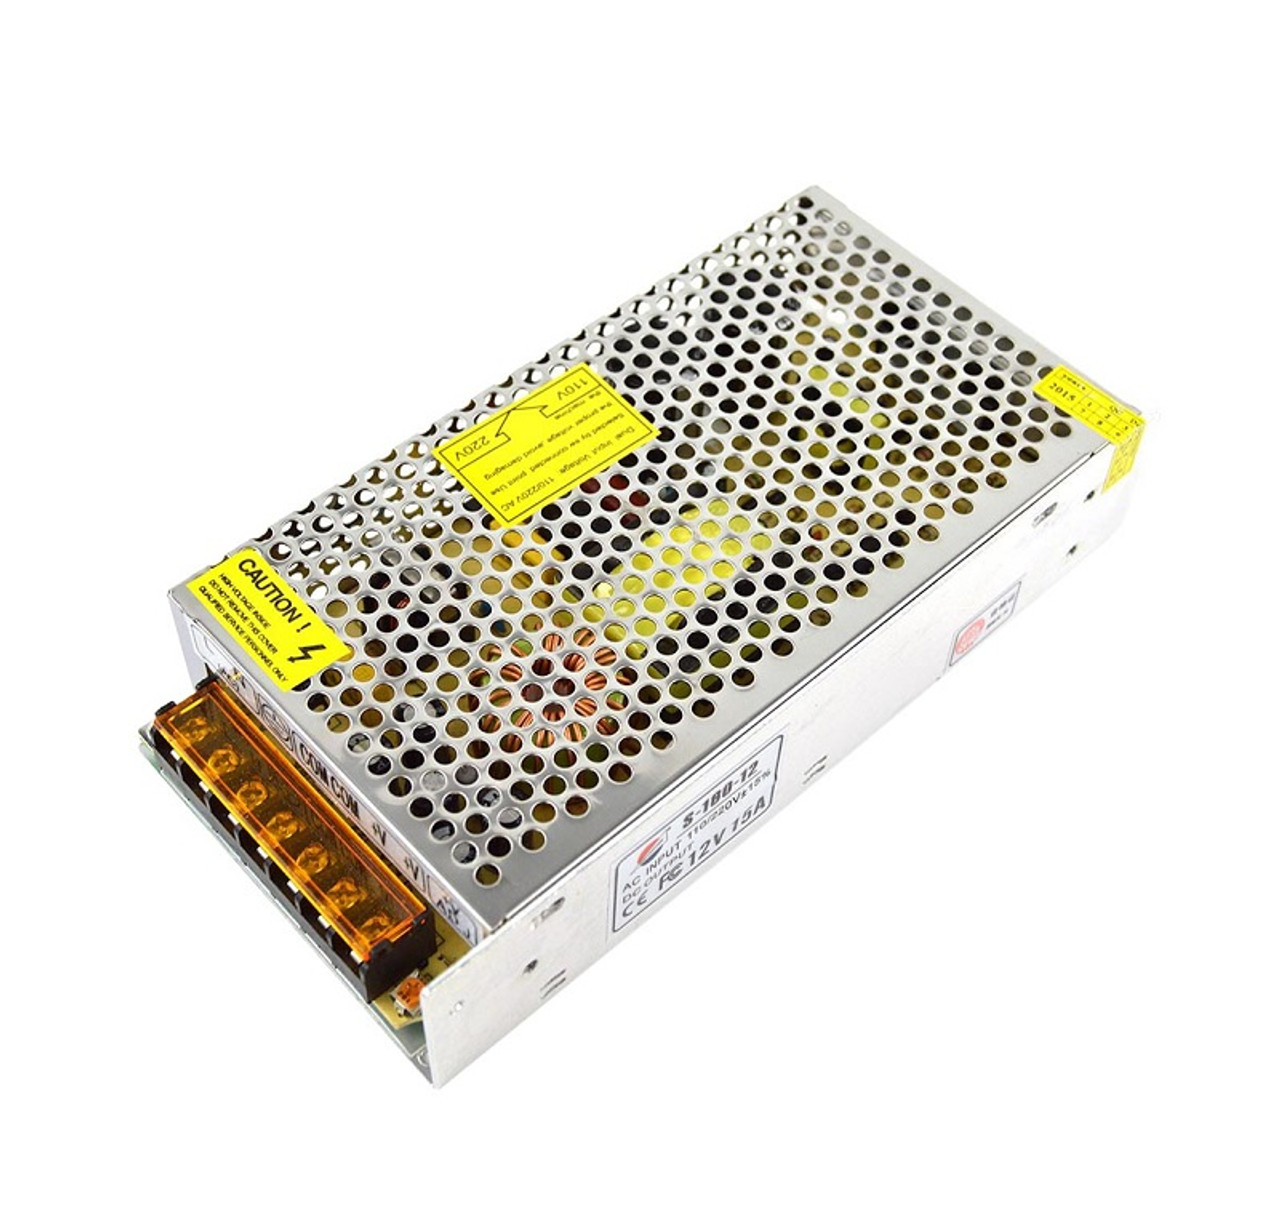 RM1-6754-000 - HP Low Voltage Power Supply - 220V for Color LaserJet CP5525 / M750 / M775 Series